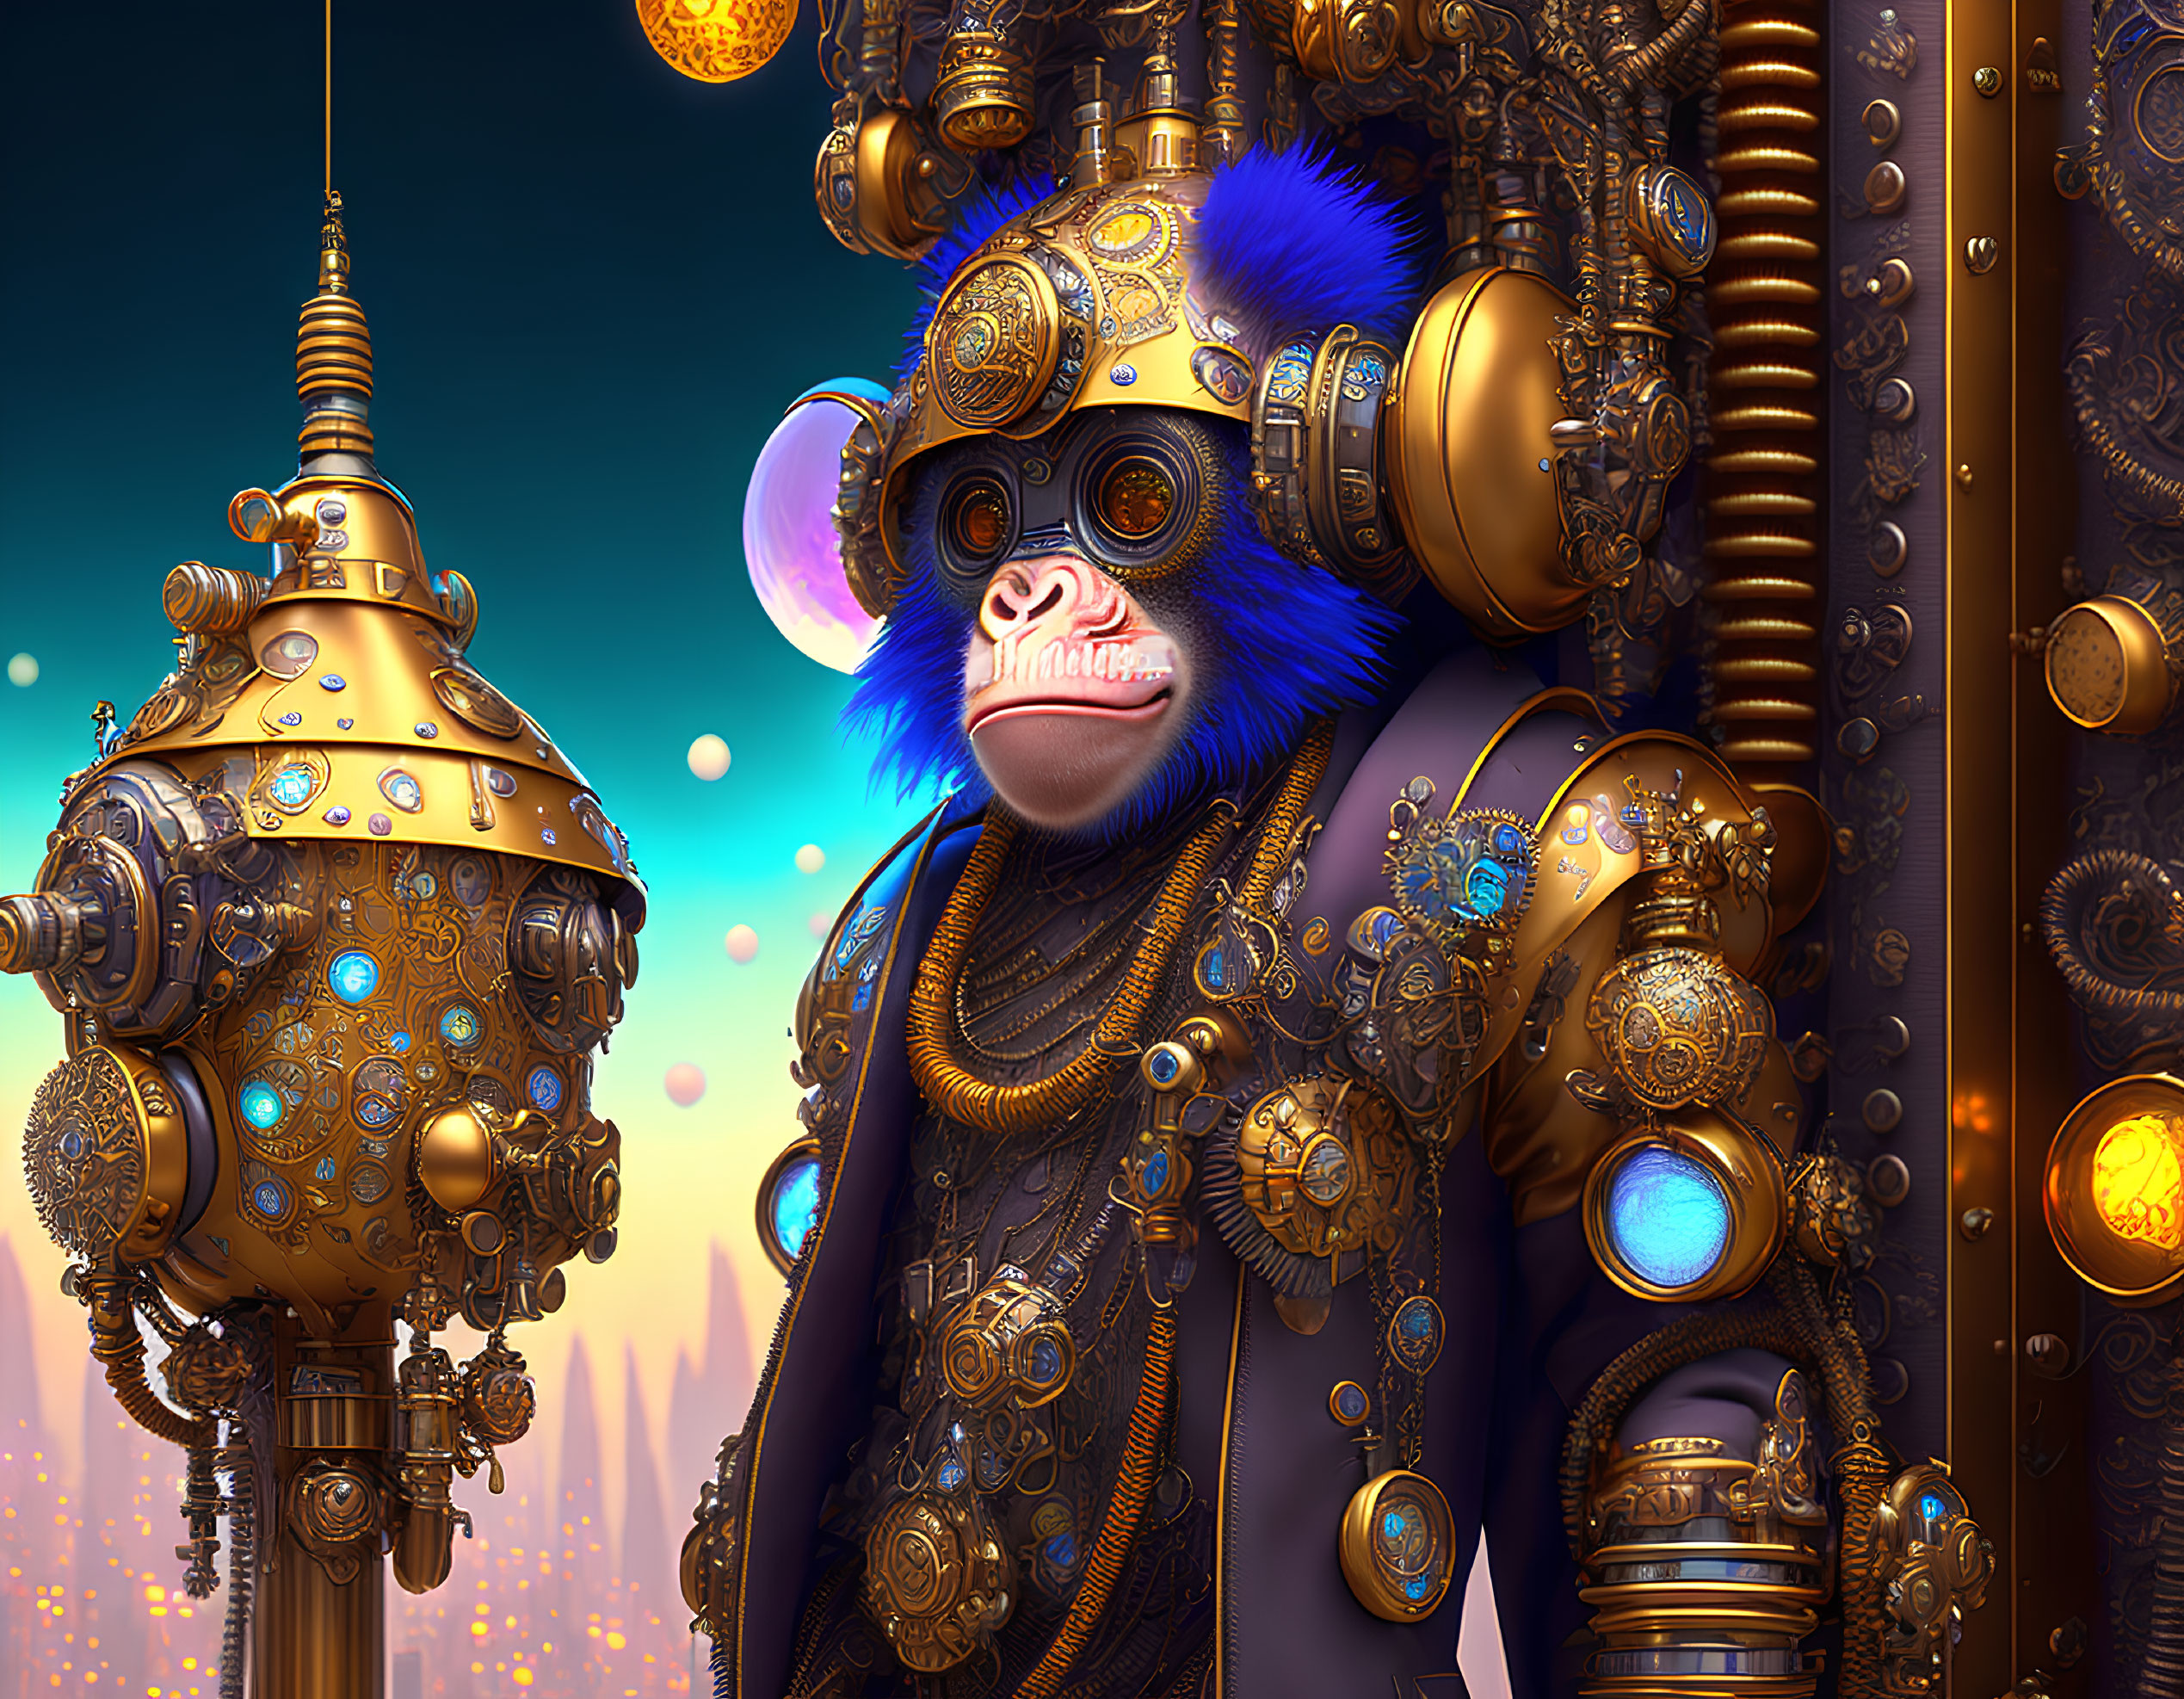 Steampunk-themed digital artwork with monkey-like figure and intricate mechanical armor